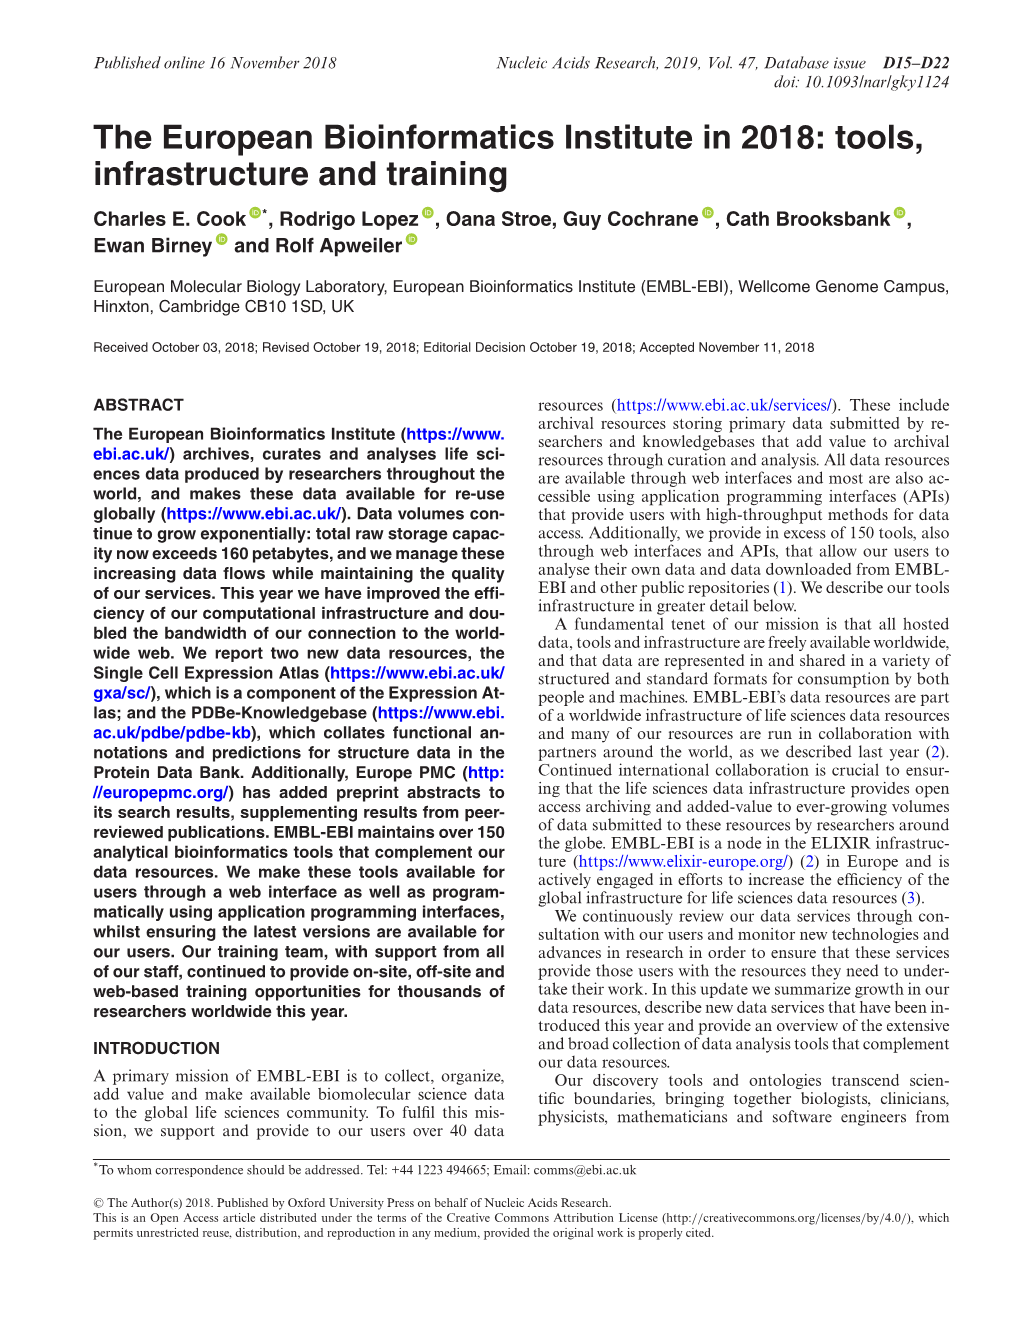 The European Bioinformatics Institute in 2018: Tools, Infrastructure and Training Charles E